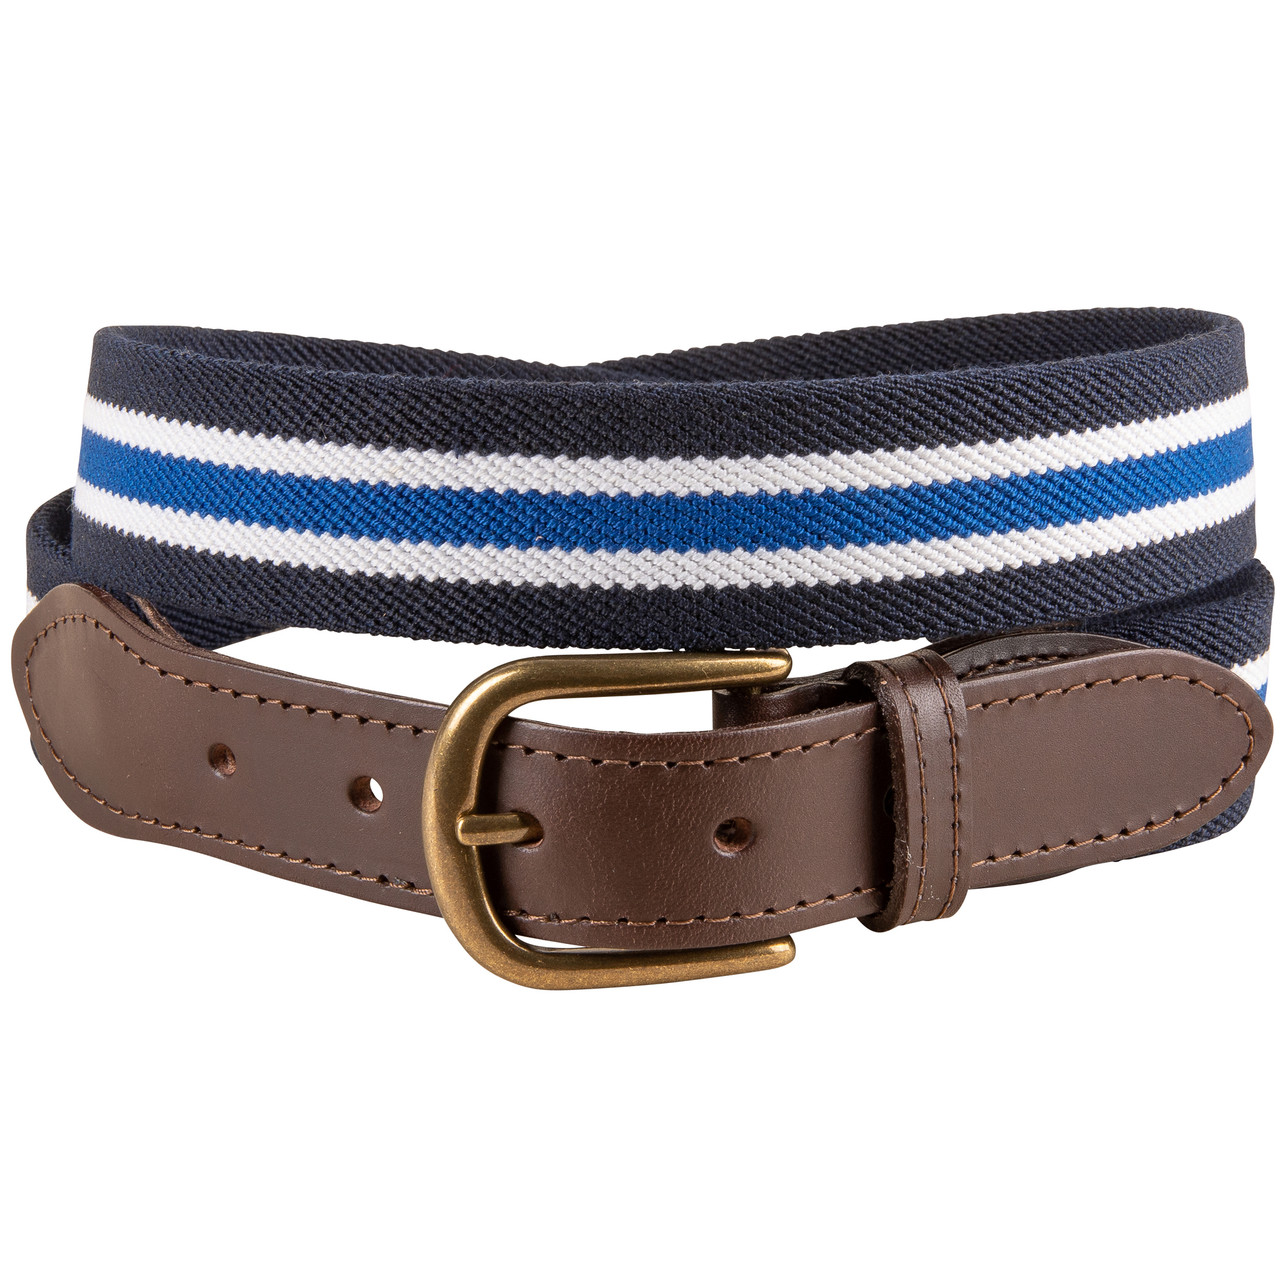 Stretch Webbing Leather Tab Belt by Belted Cow Company. Made in Maine.